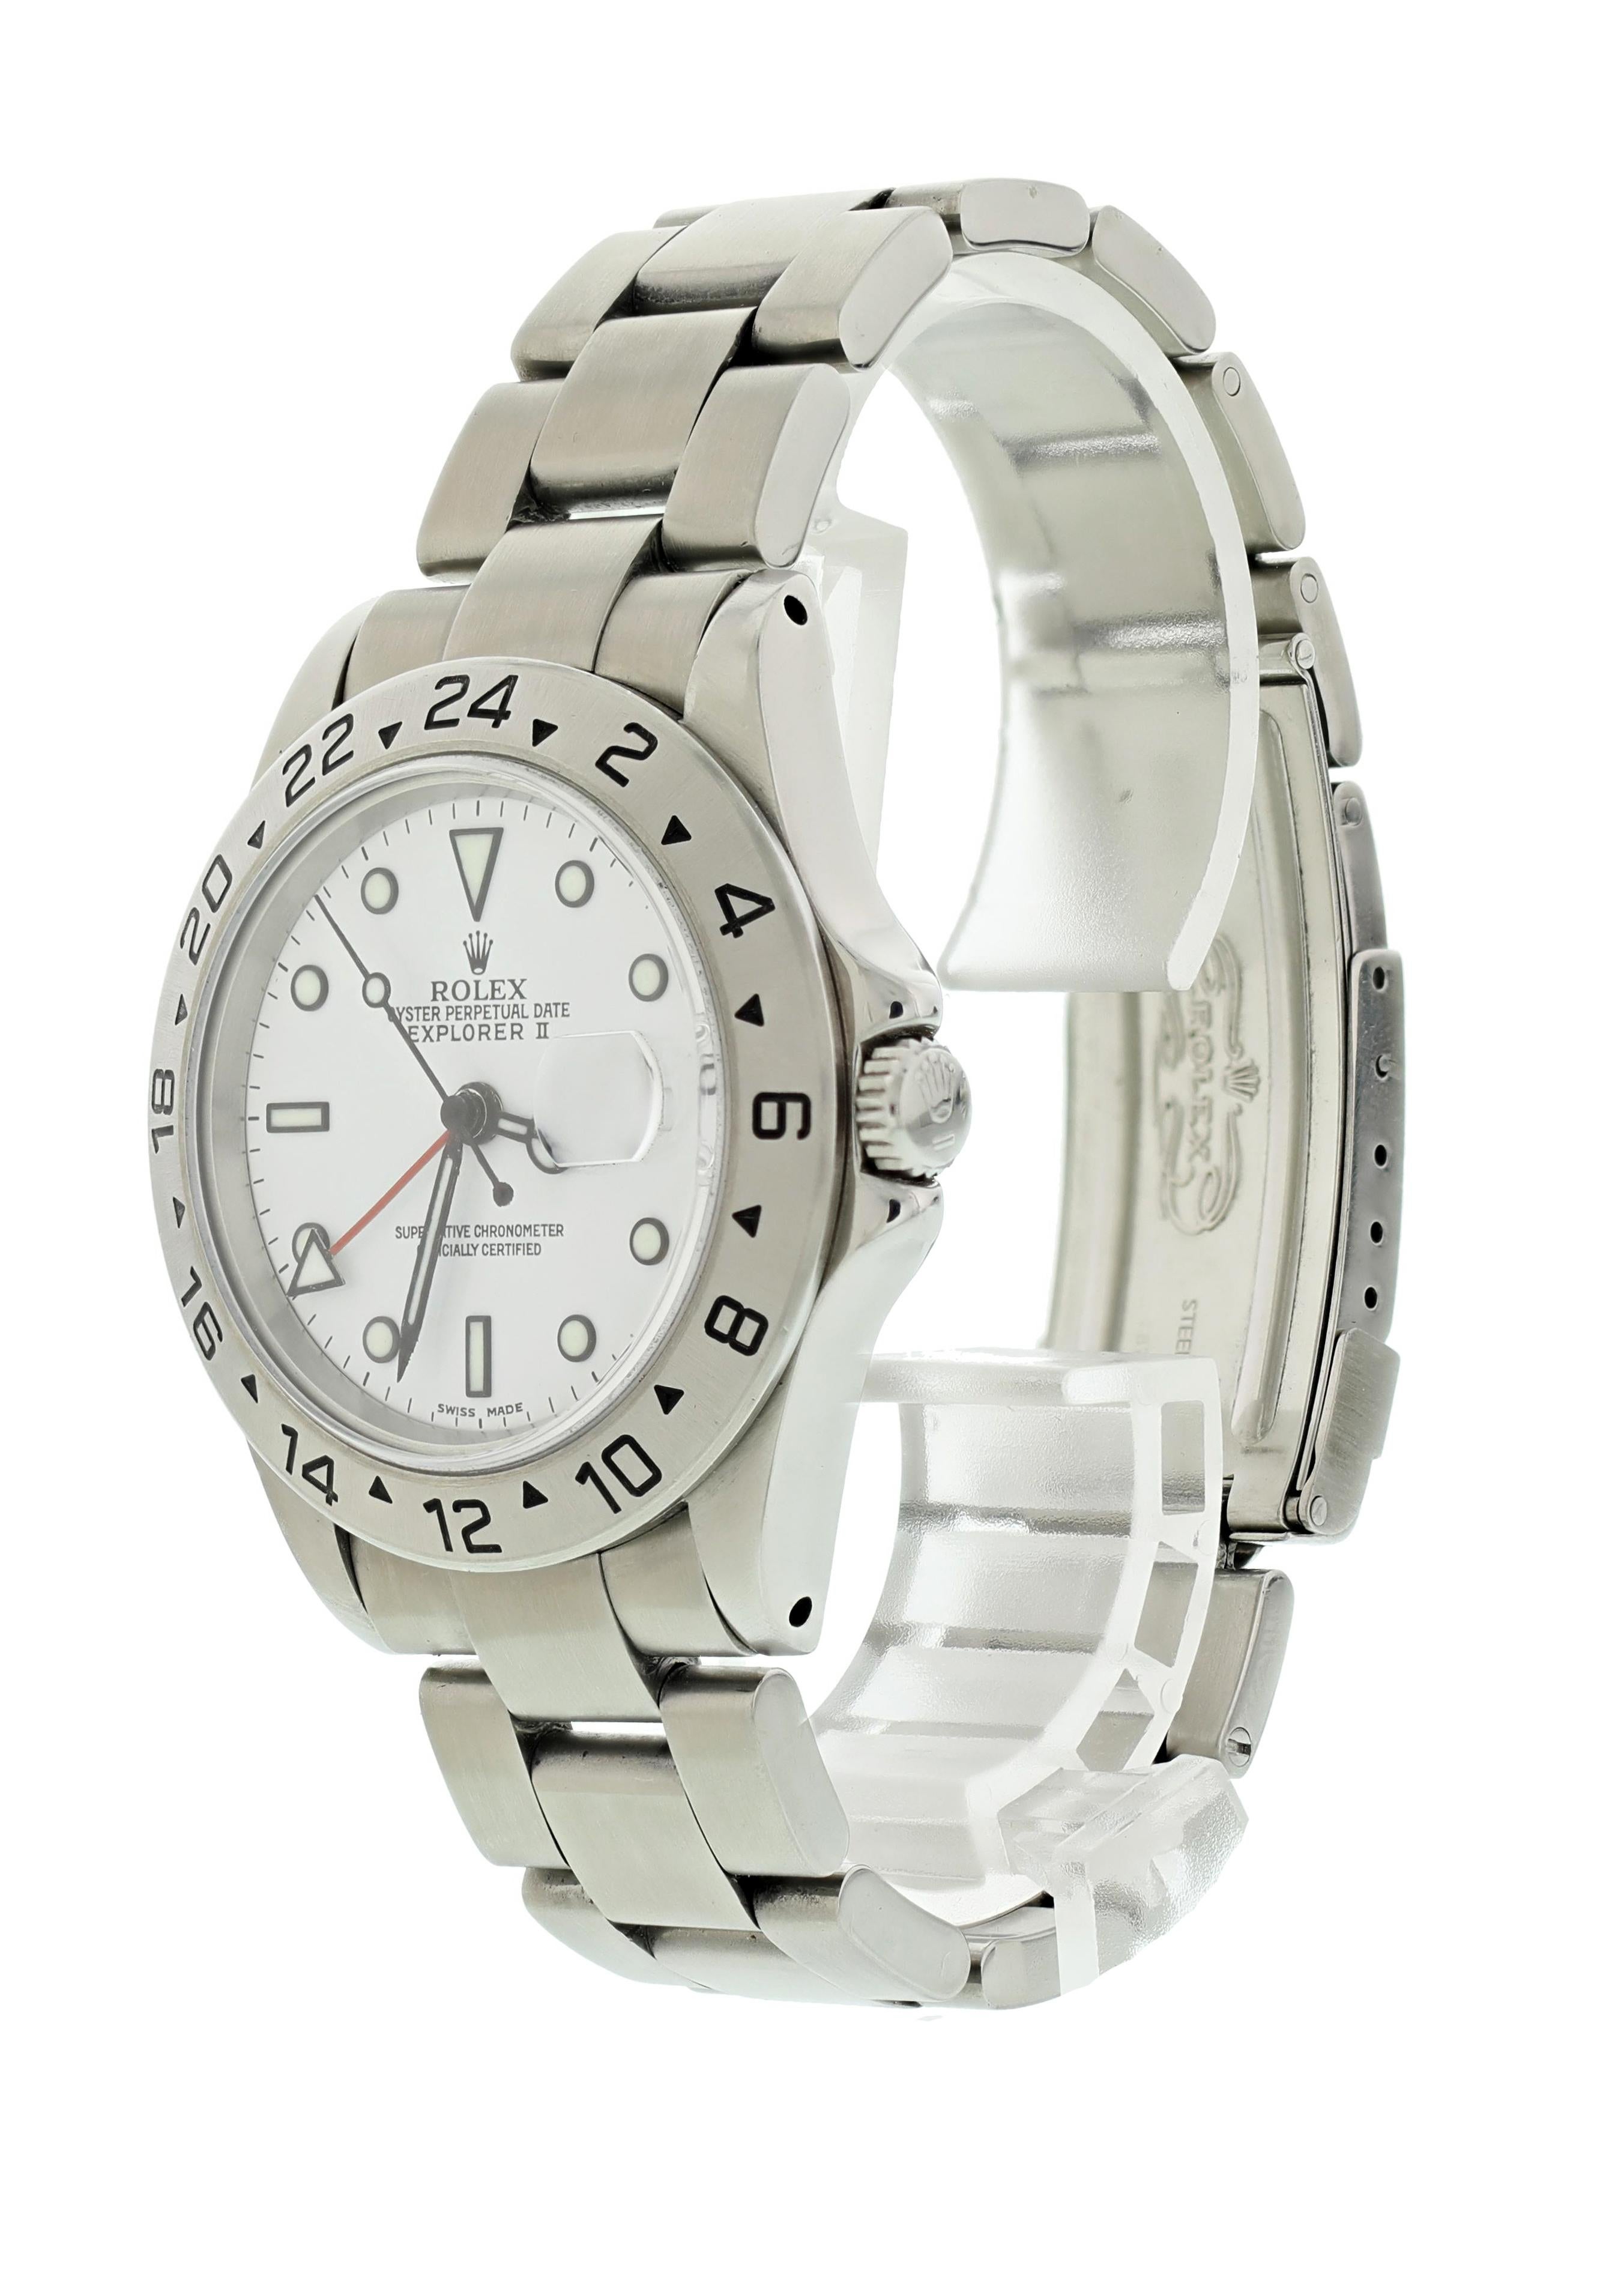 Rolex Explorer II 16570 Men's Watch.
40mm Stainless Steel case. 
Stainless Steel 24 Hour Time Display bezel. 
White dial with Luminous Steel hands and index hour markers. 
Minute markers on the outer dial. 
Date display at the 3 o'clock position.